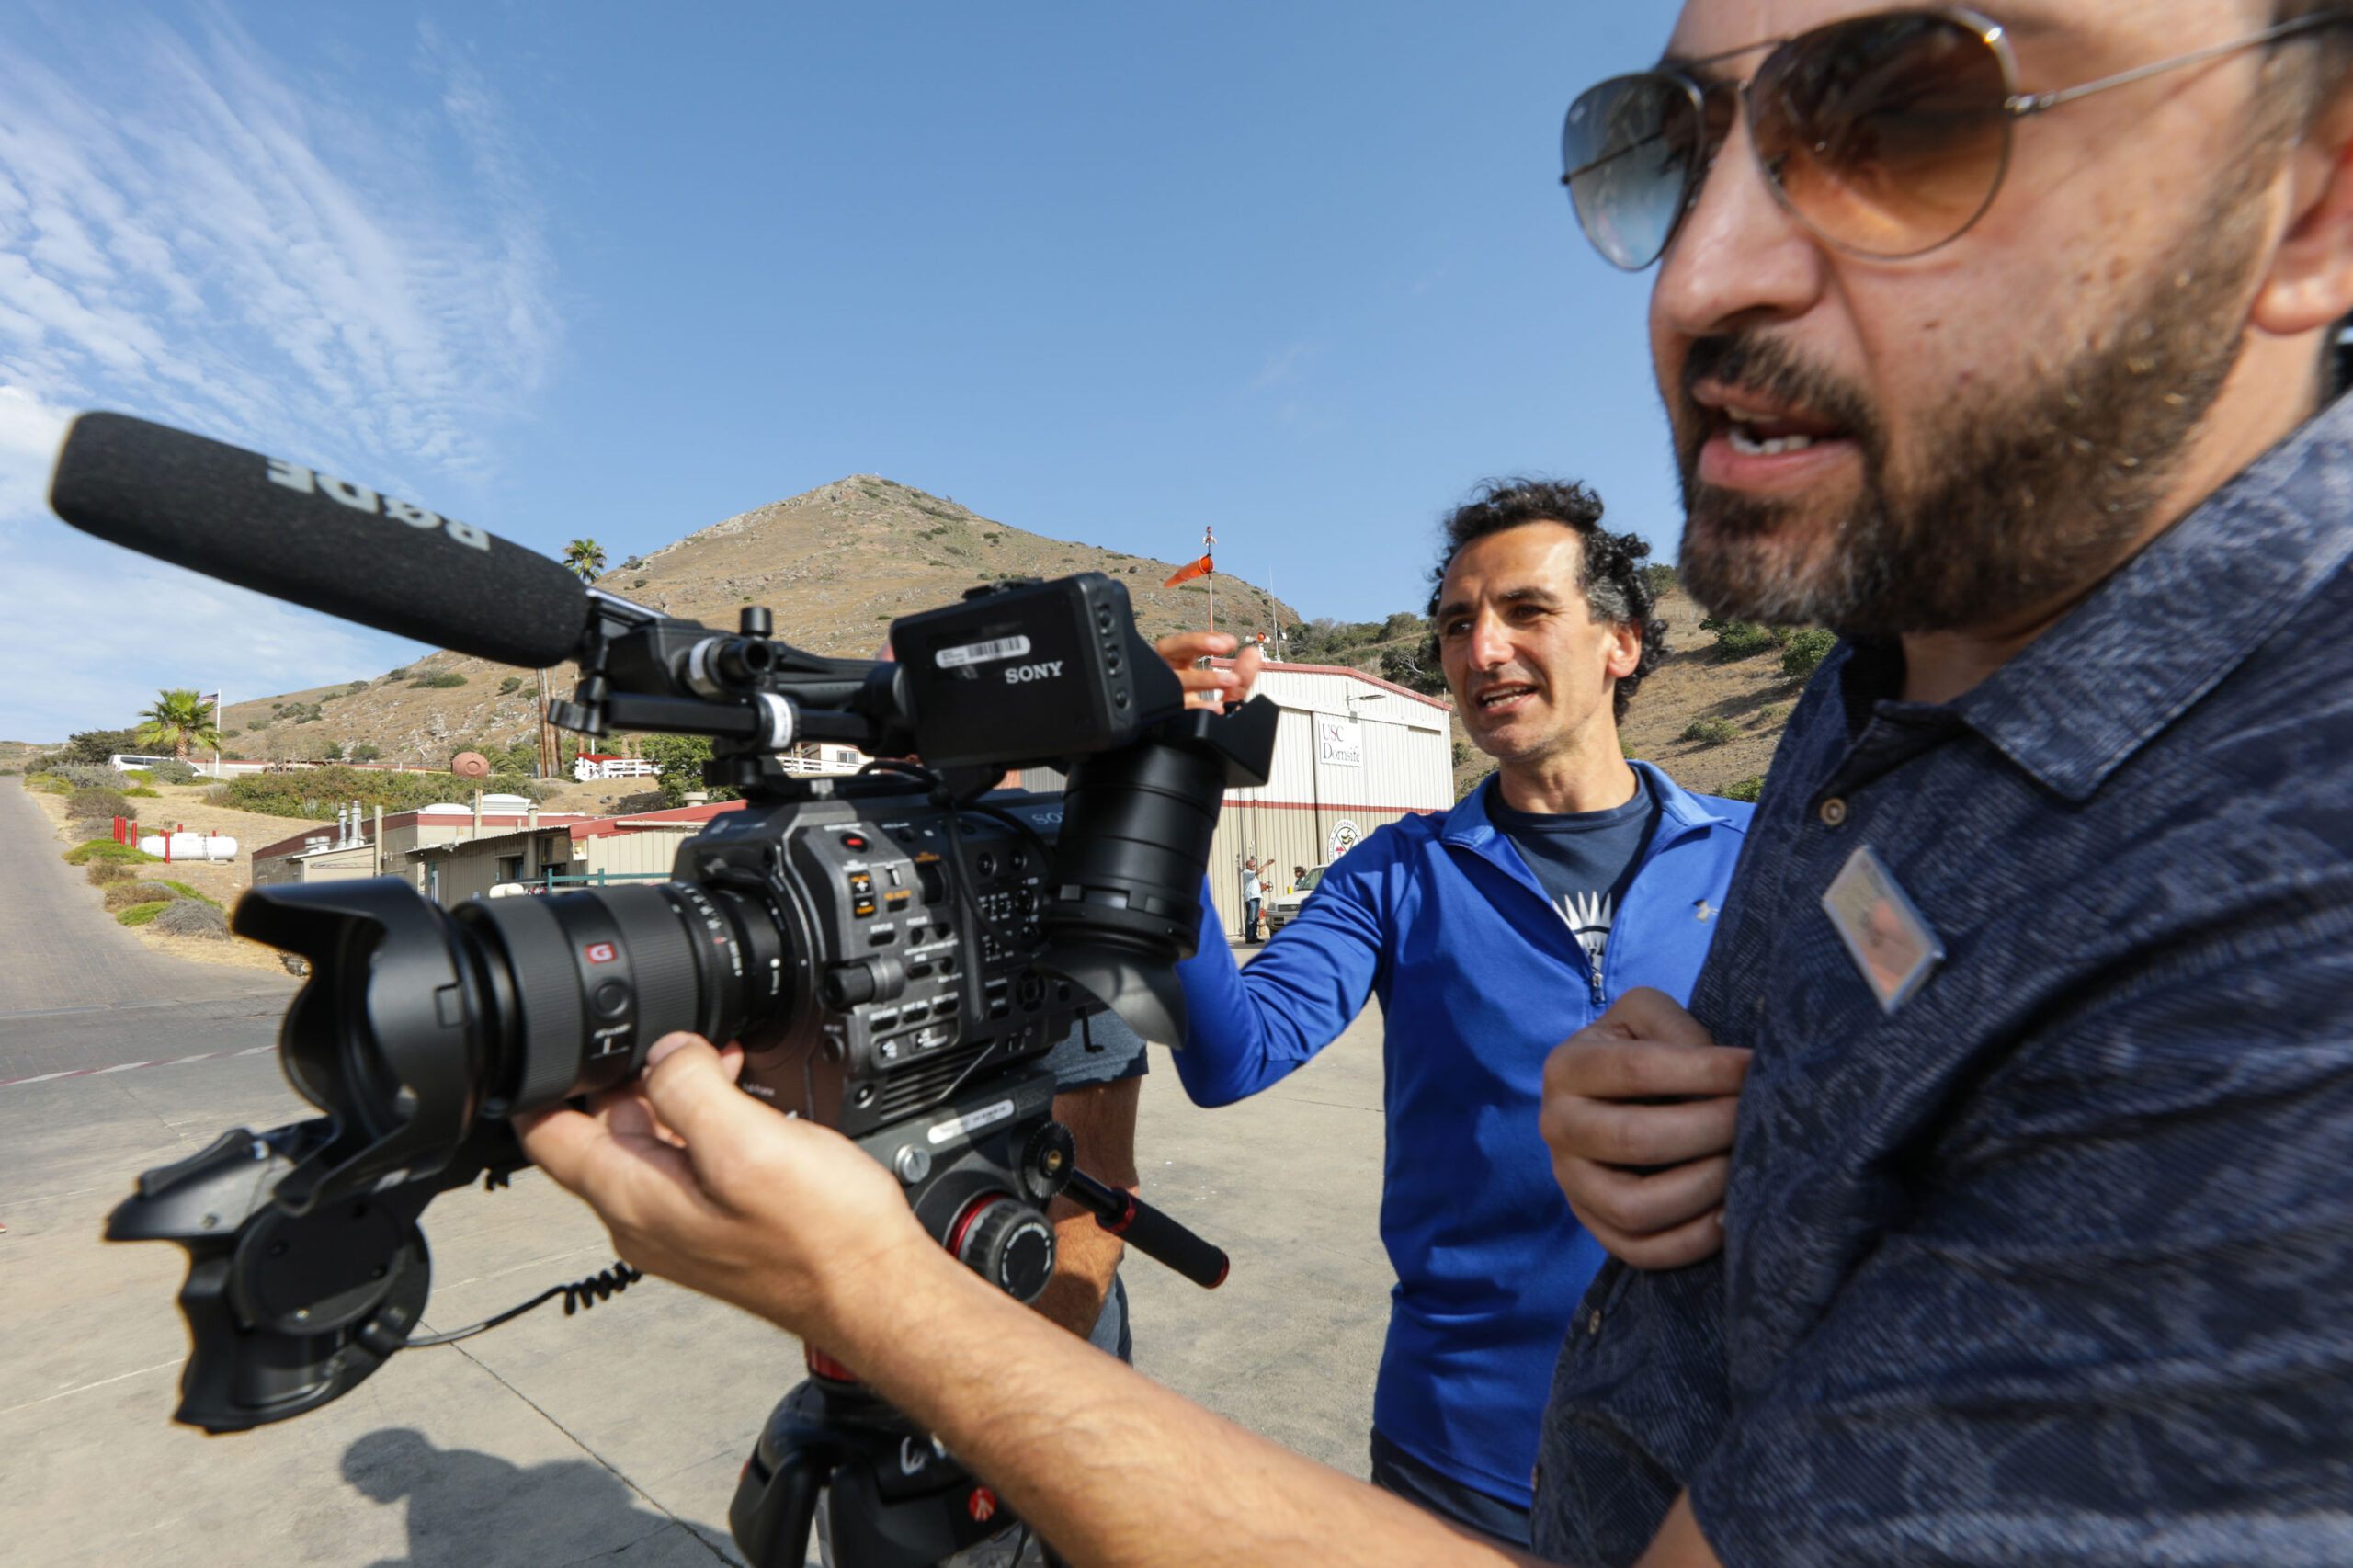 a man in a blue jacket looks through the viewfinder of a video camera while a man wearing sunglasses and a blue shirt adjusts the settings on a lens